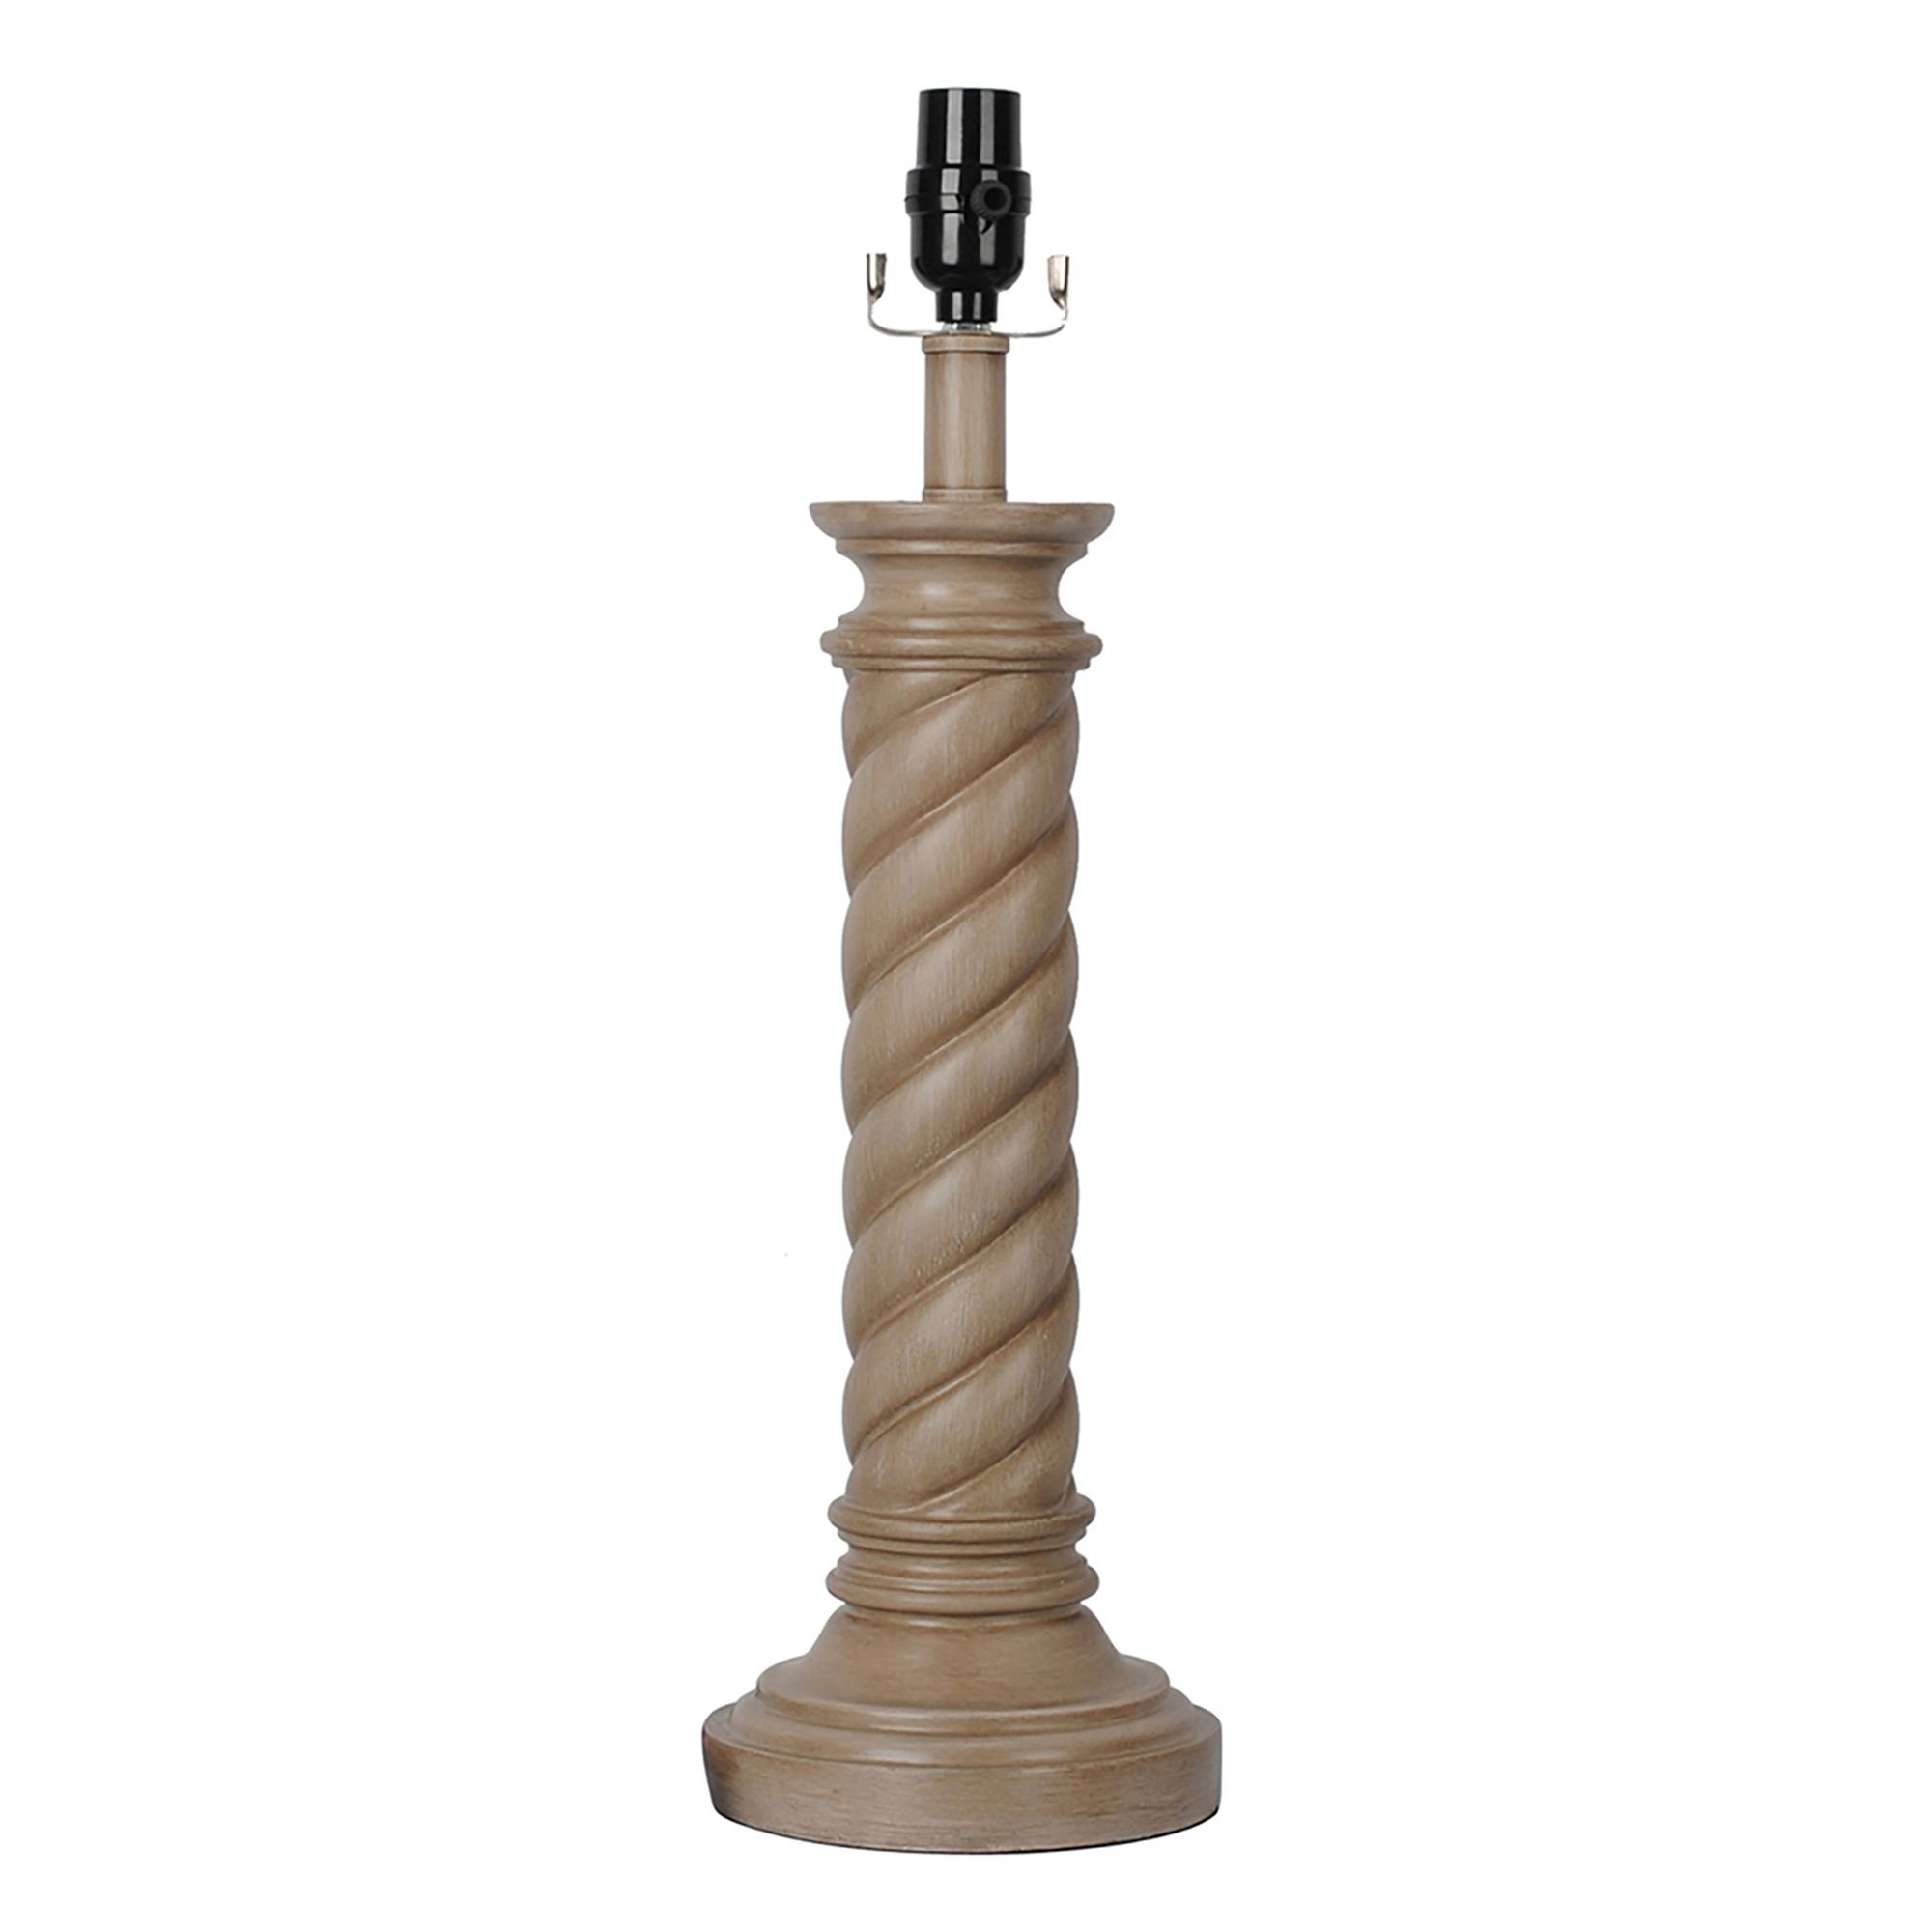 Essential Home Twist Column Table Lamp Base with CFL Bulb